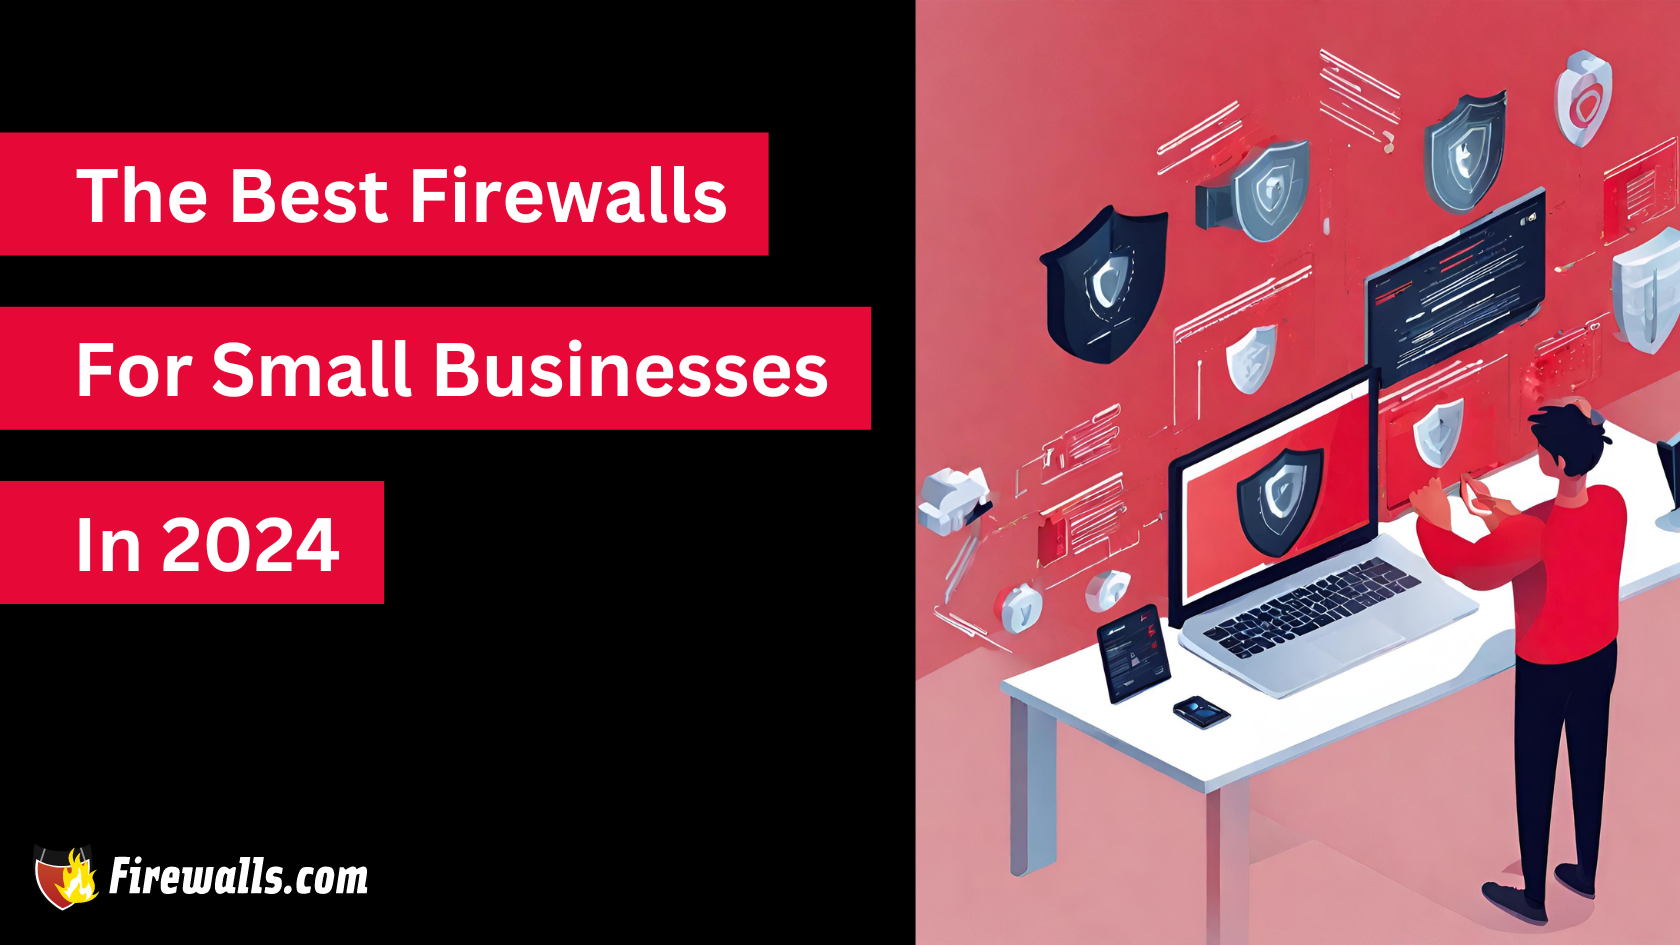 The Best Firewalls for Small Businesses in 2024